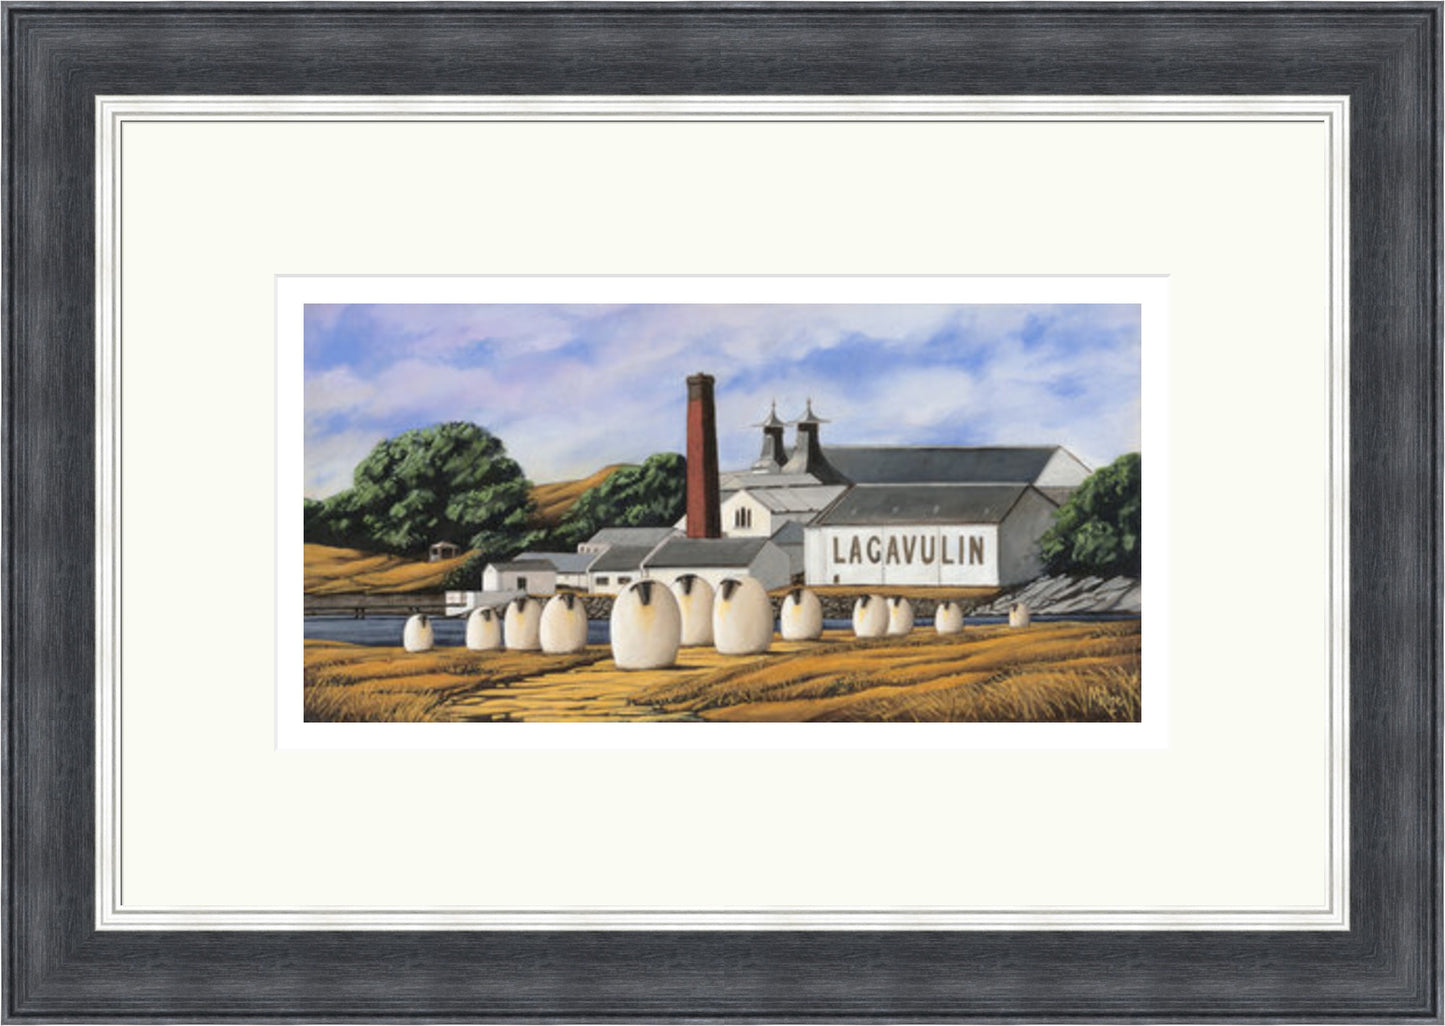 On the Whisky Trail - Lagavulin by Stan Milne